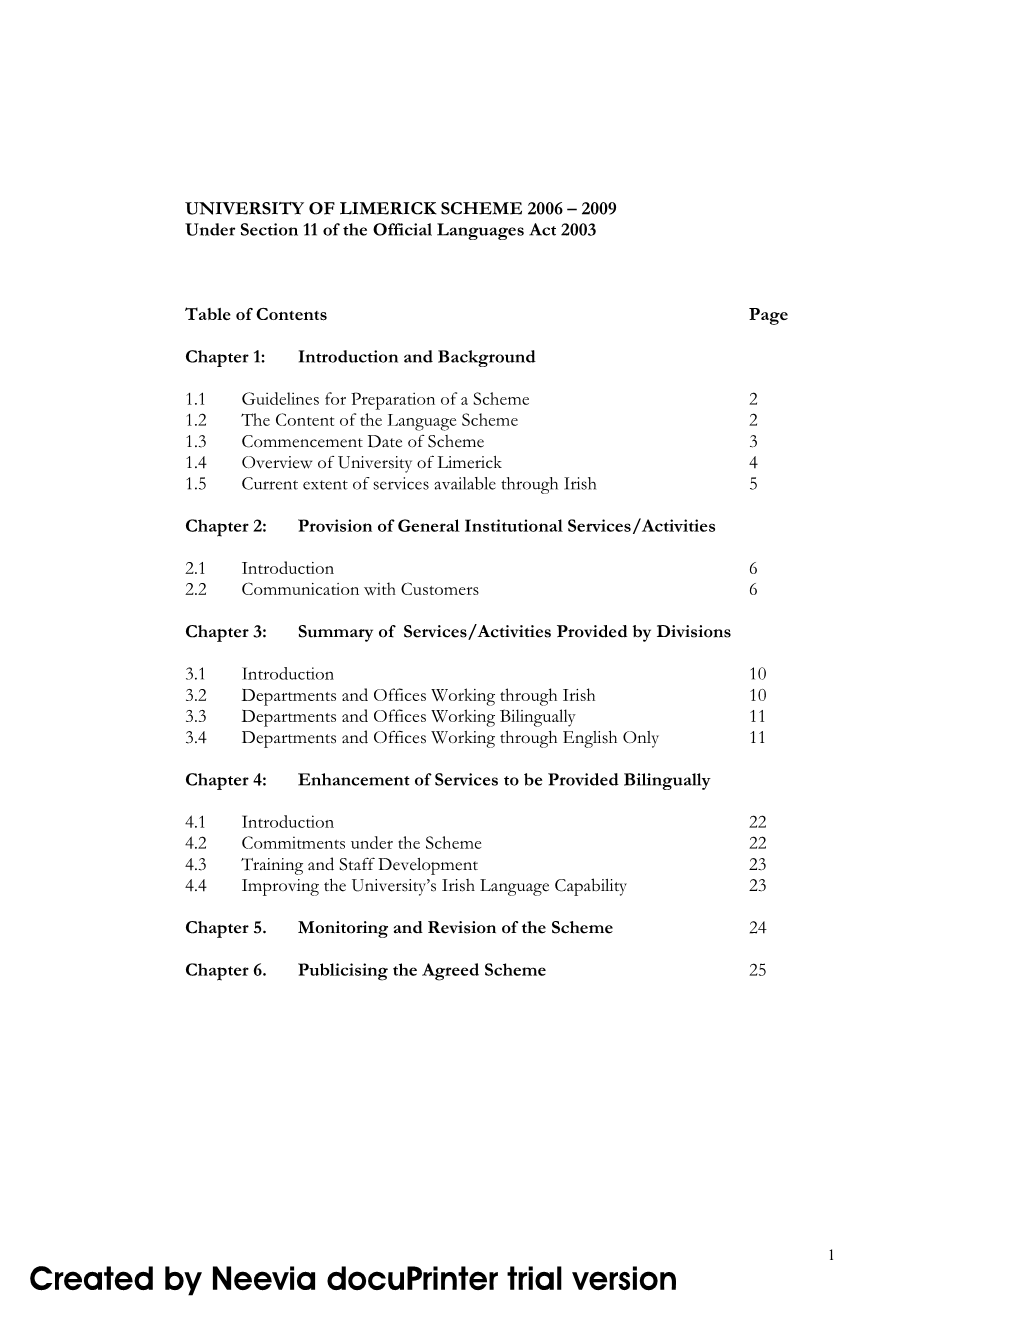 UNIVERSITY of LIMERICK SCHEME 2006 – 2009 Under Section 11 of the Official Languages Act 2003